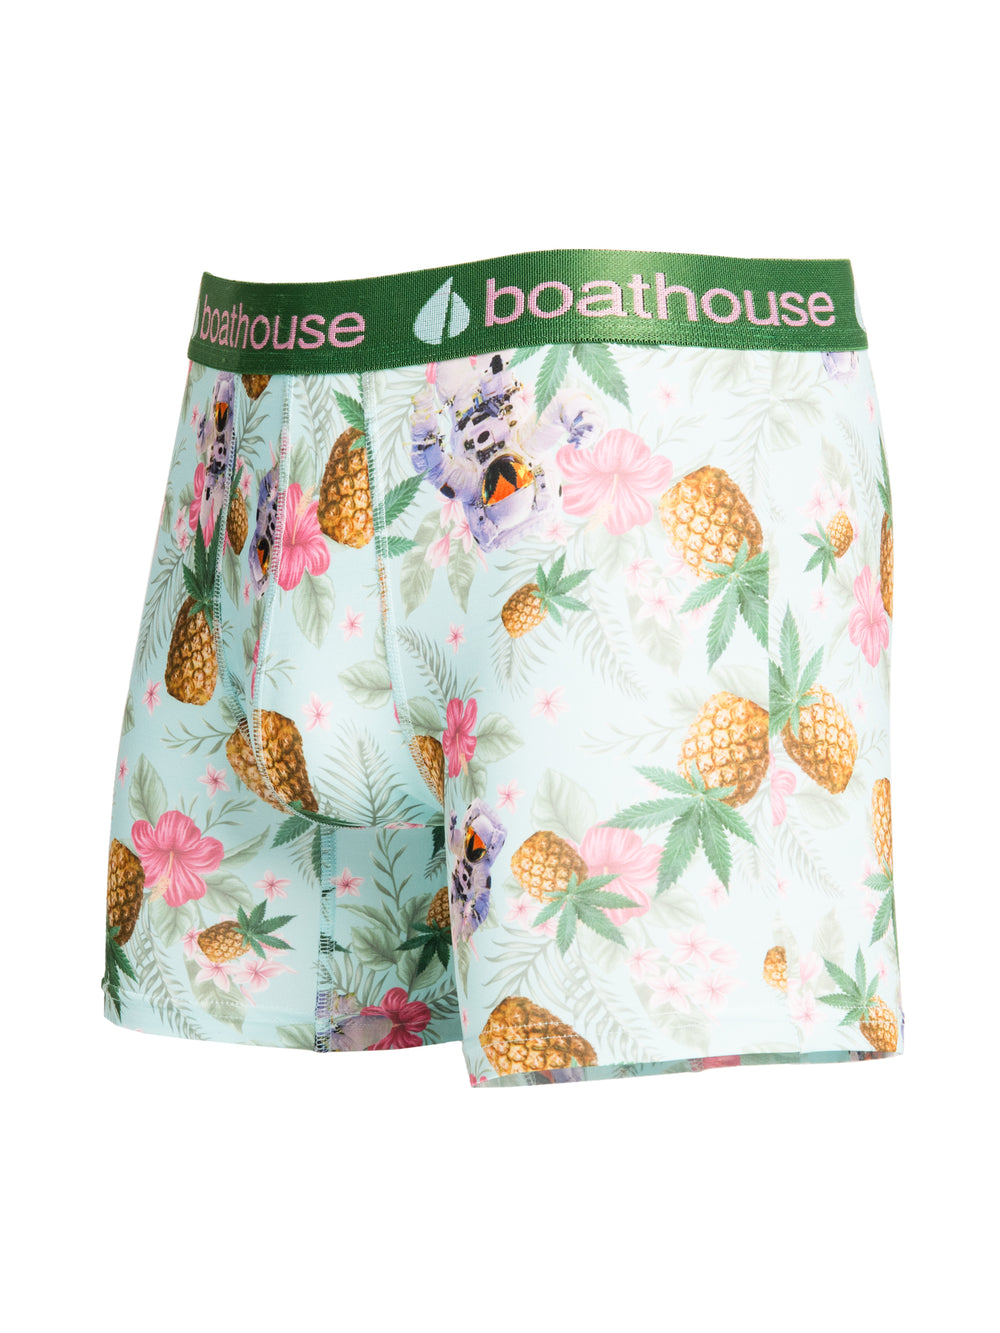 NOVELTY BOXER BRIEF - ASTRONAUT PINEAPPLES - CLEARANCE